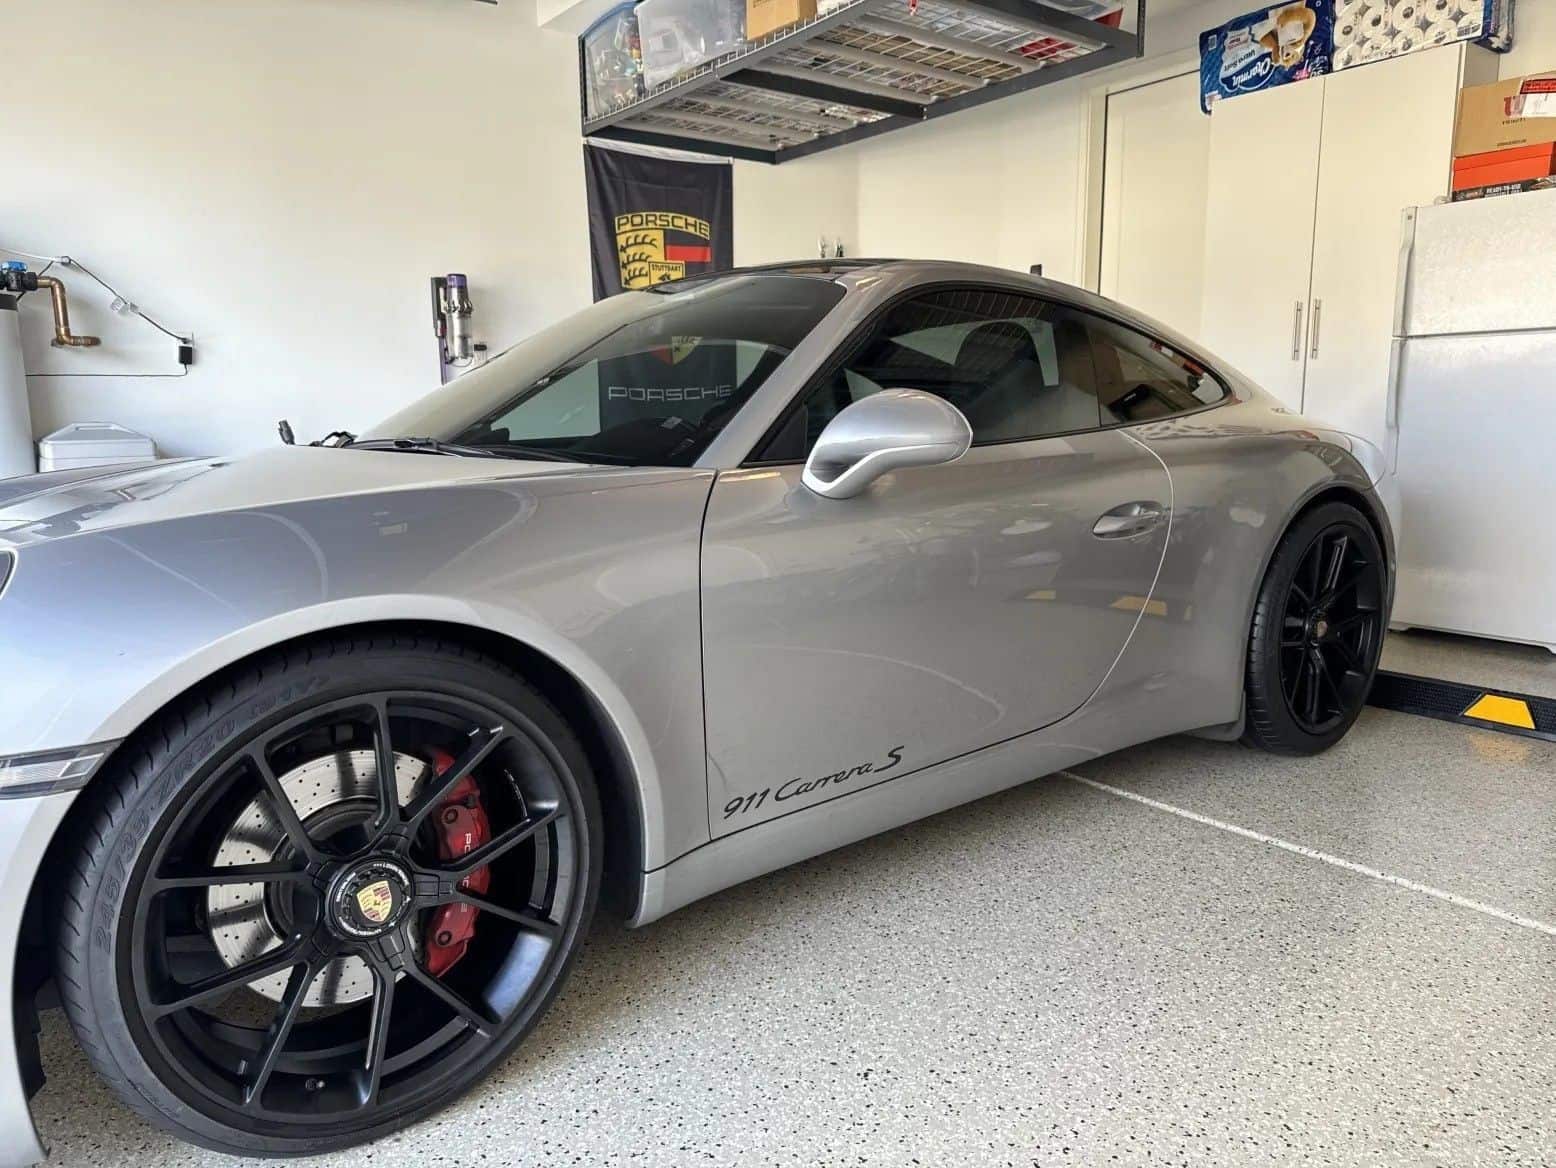 Wheels and Tires/Axles - Fully Custom Forged Wheels - MEISTERWERK (NEW THREAD) - New - All Years  All Models - Calabasas, CA 91302, United States